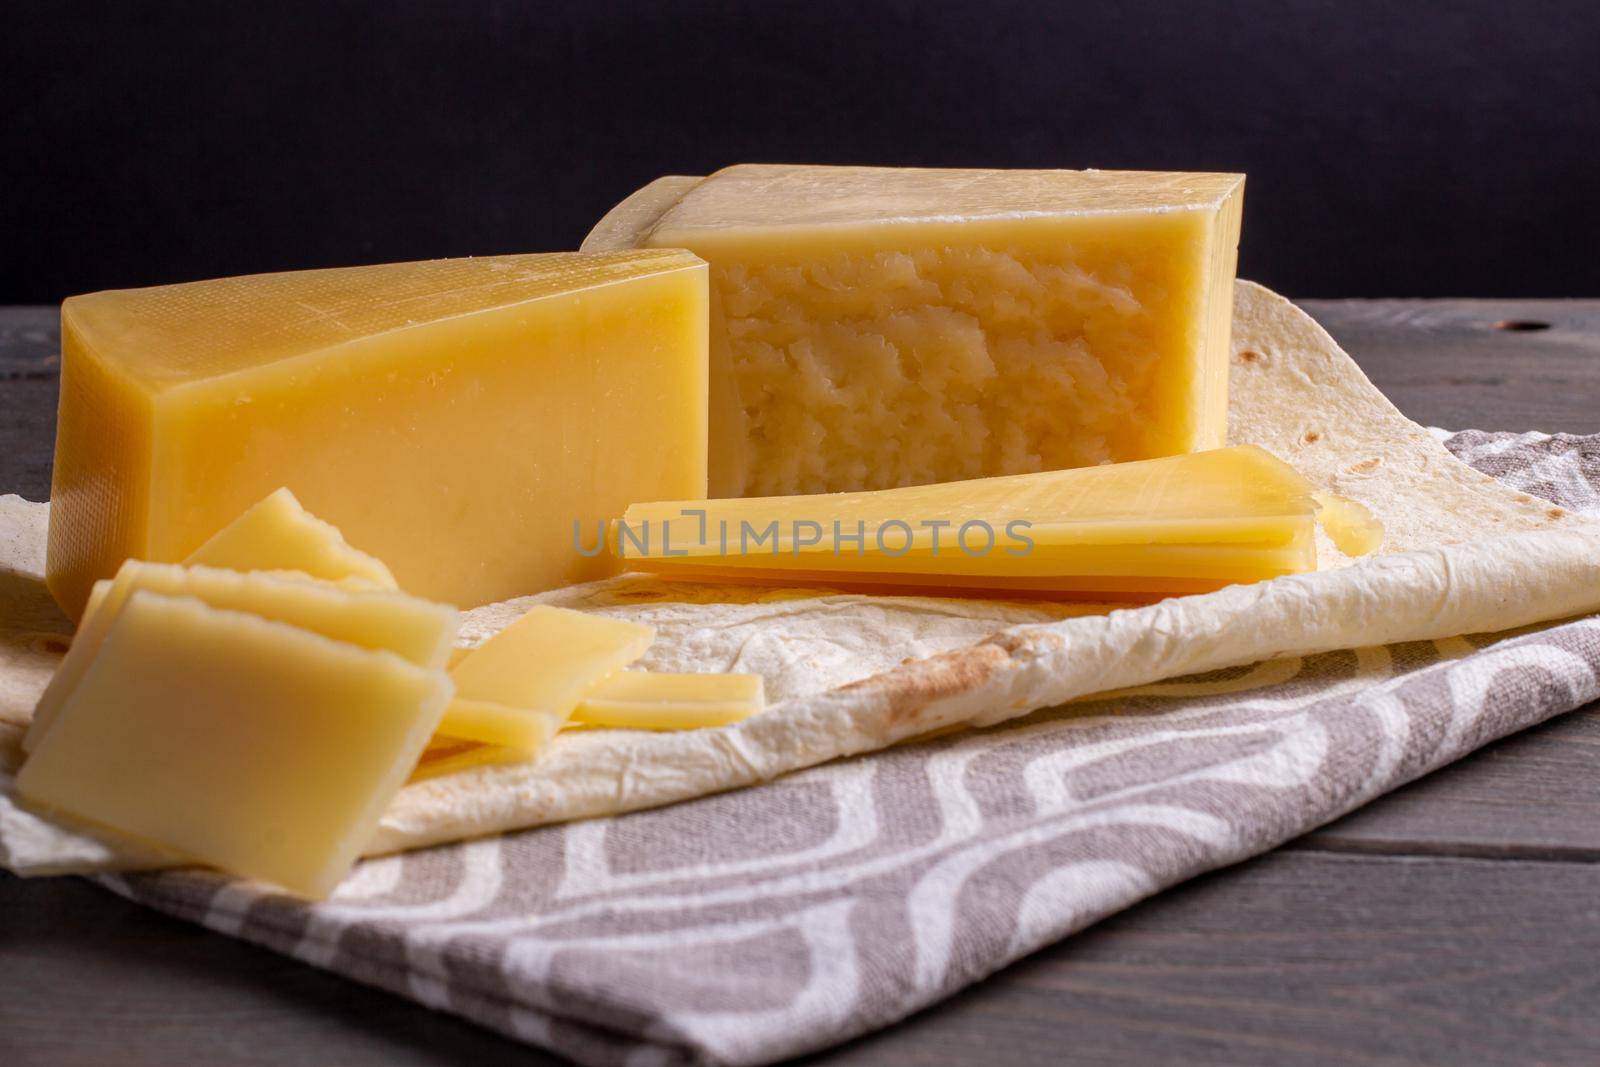 hard cheese and fibrous cheese with slices of bread are cut on a wooden board